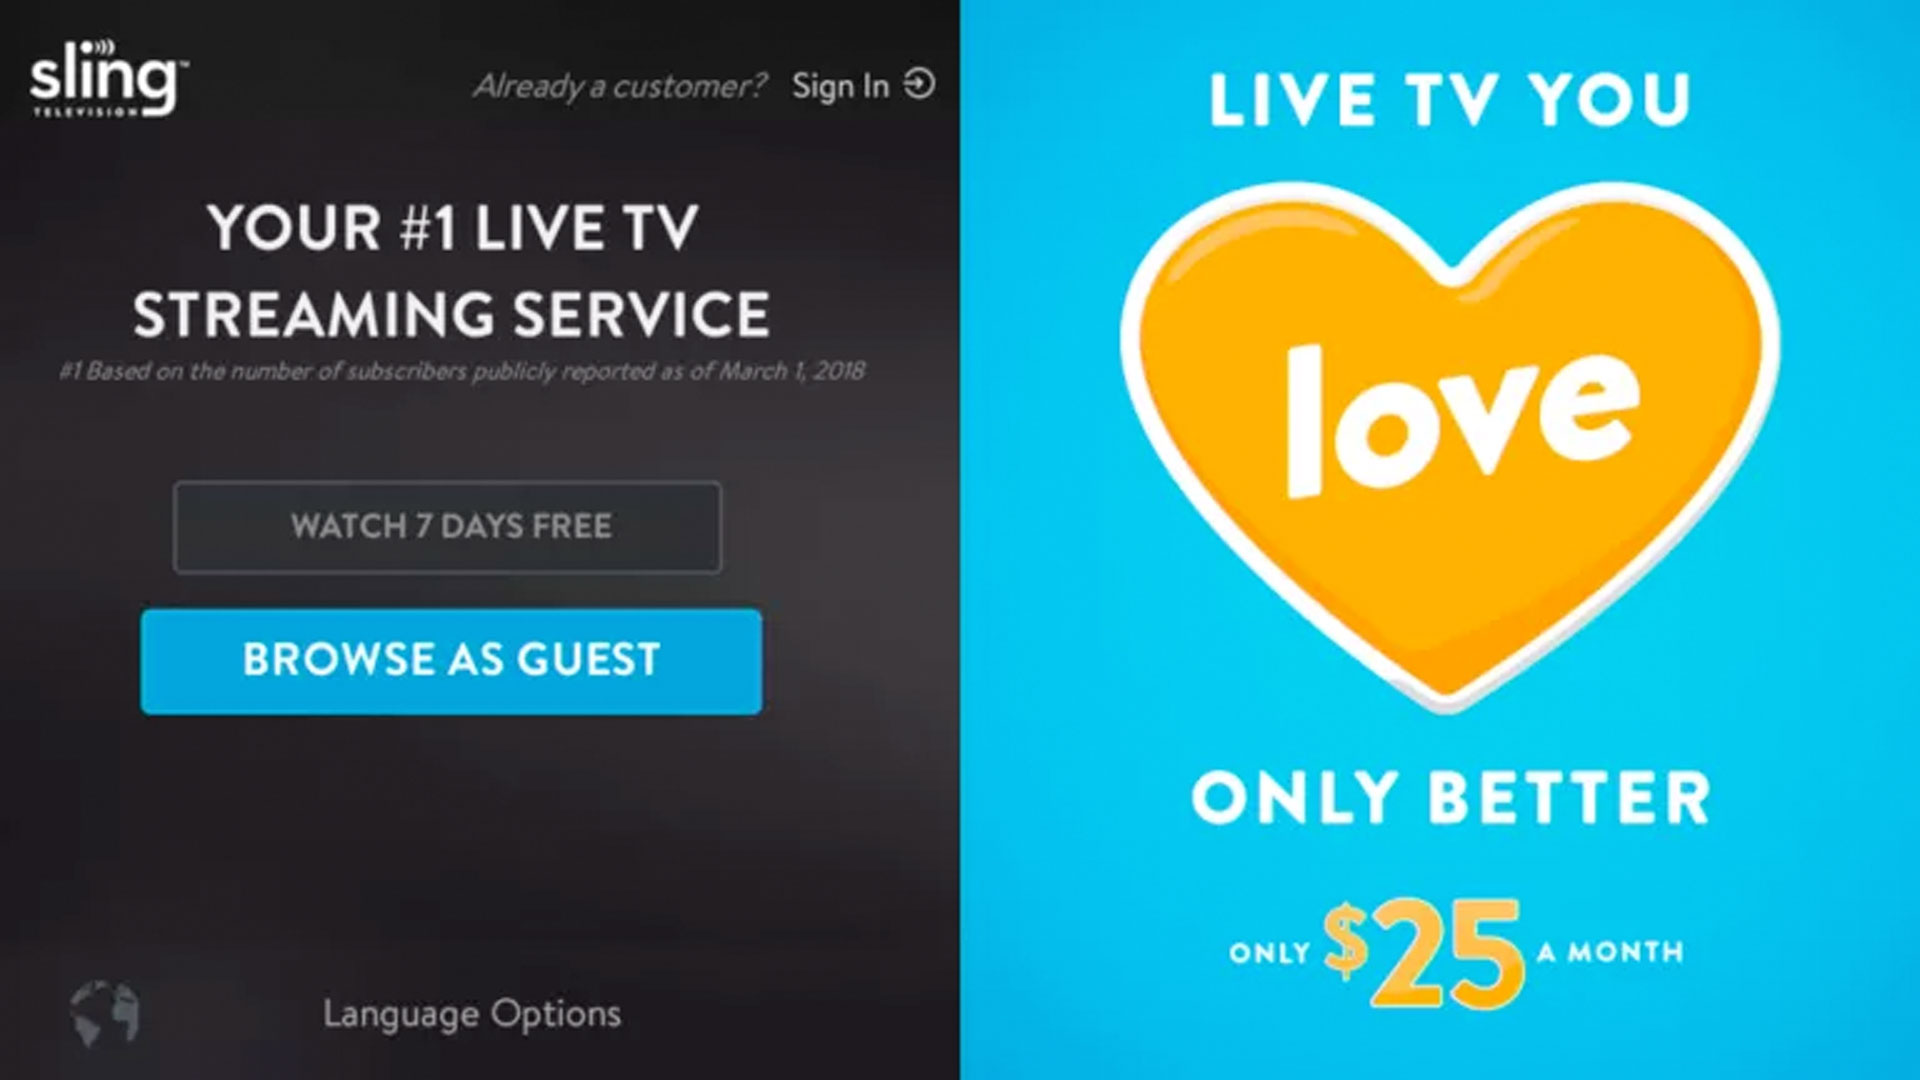 Clip vlinder Ambassade houder Sling TV offers Roku users guest accounts to watch & browse - 9to5Toys